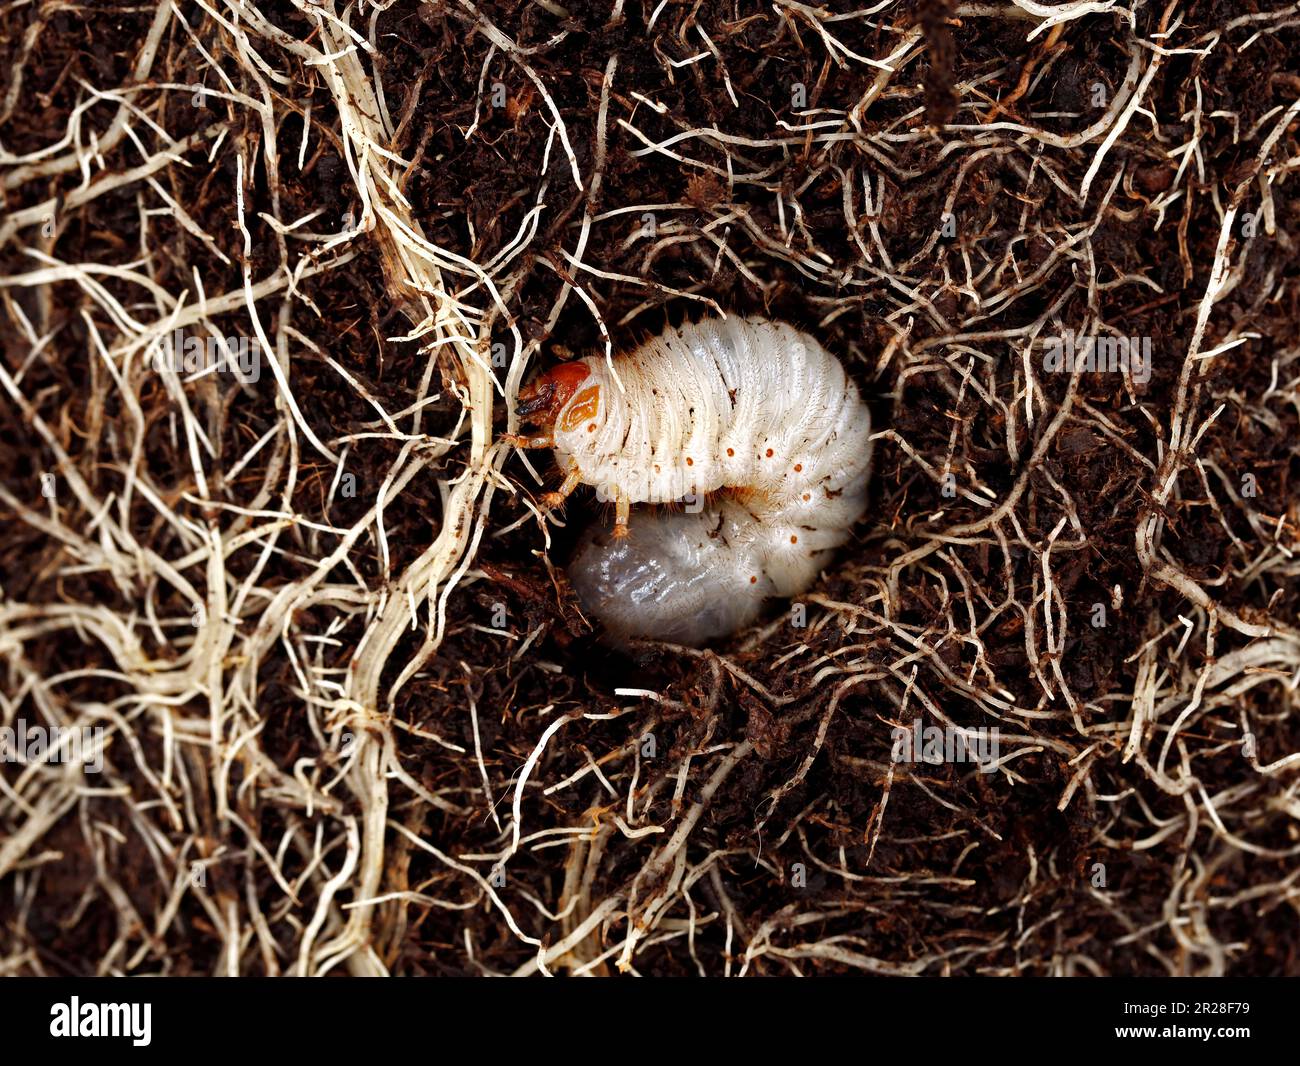 close up of white grub worm between roots in the soil, beetle